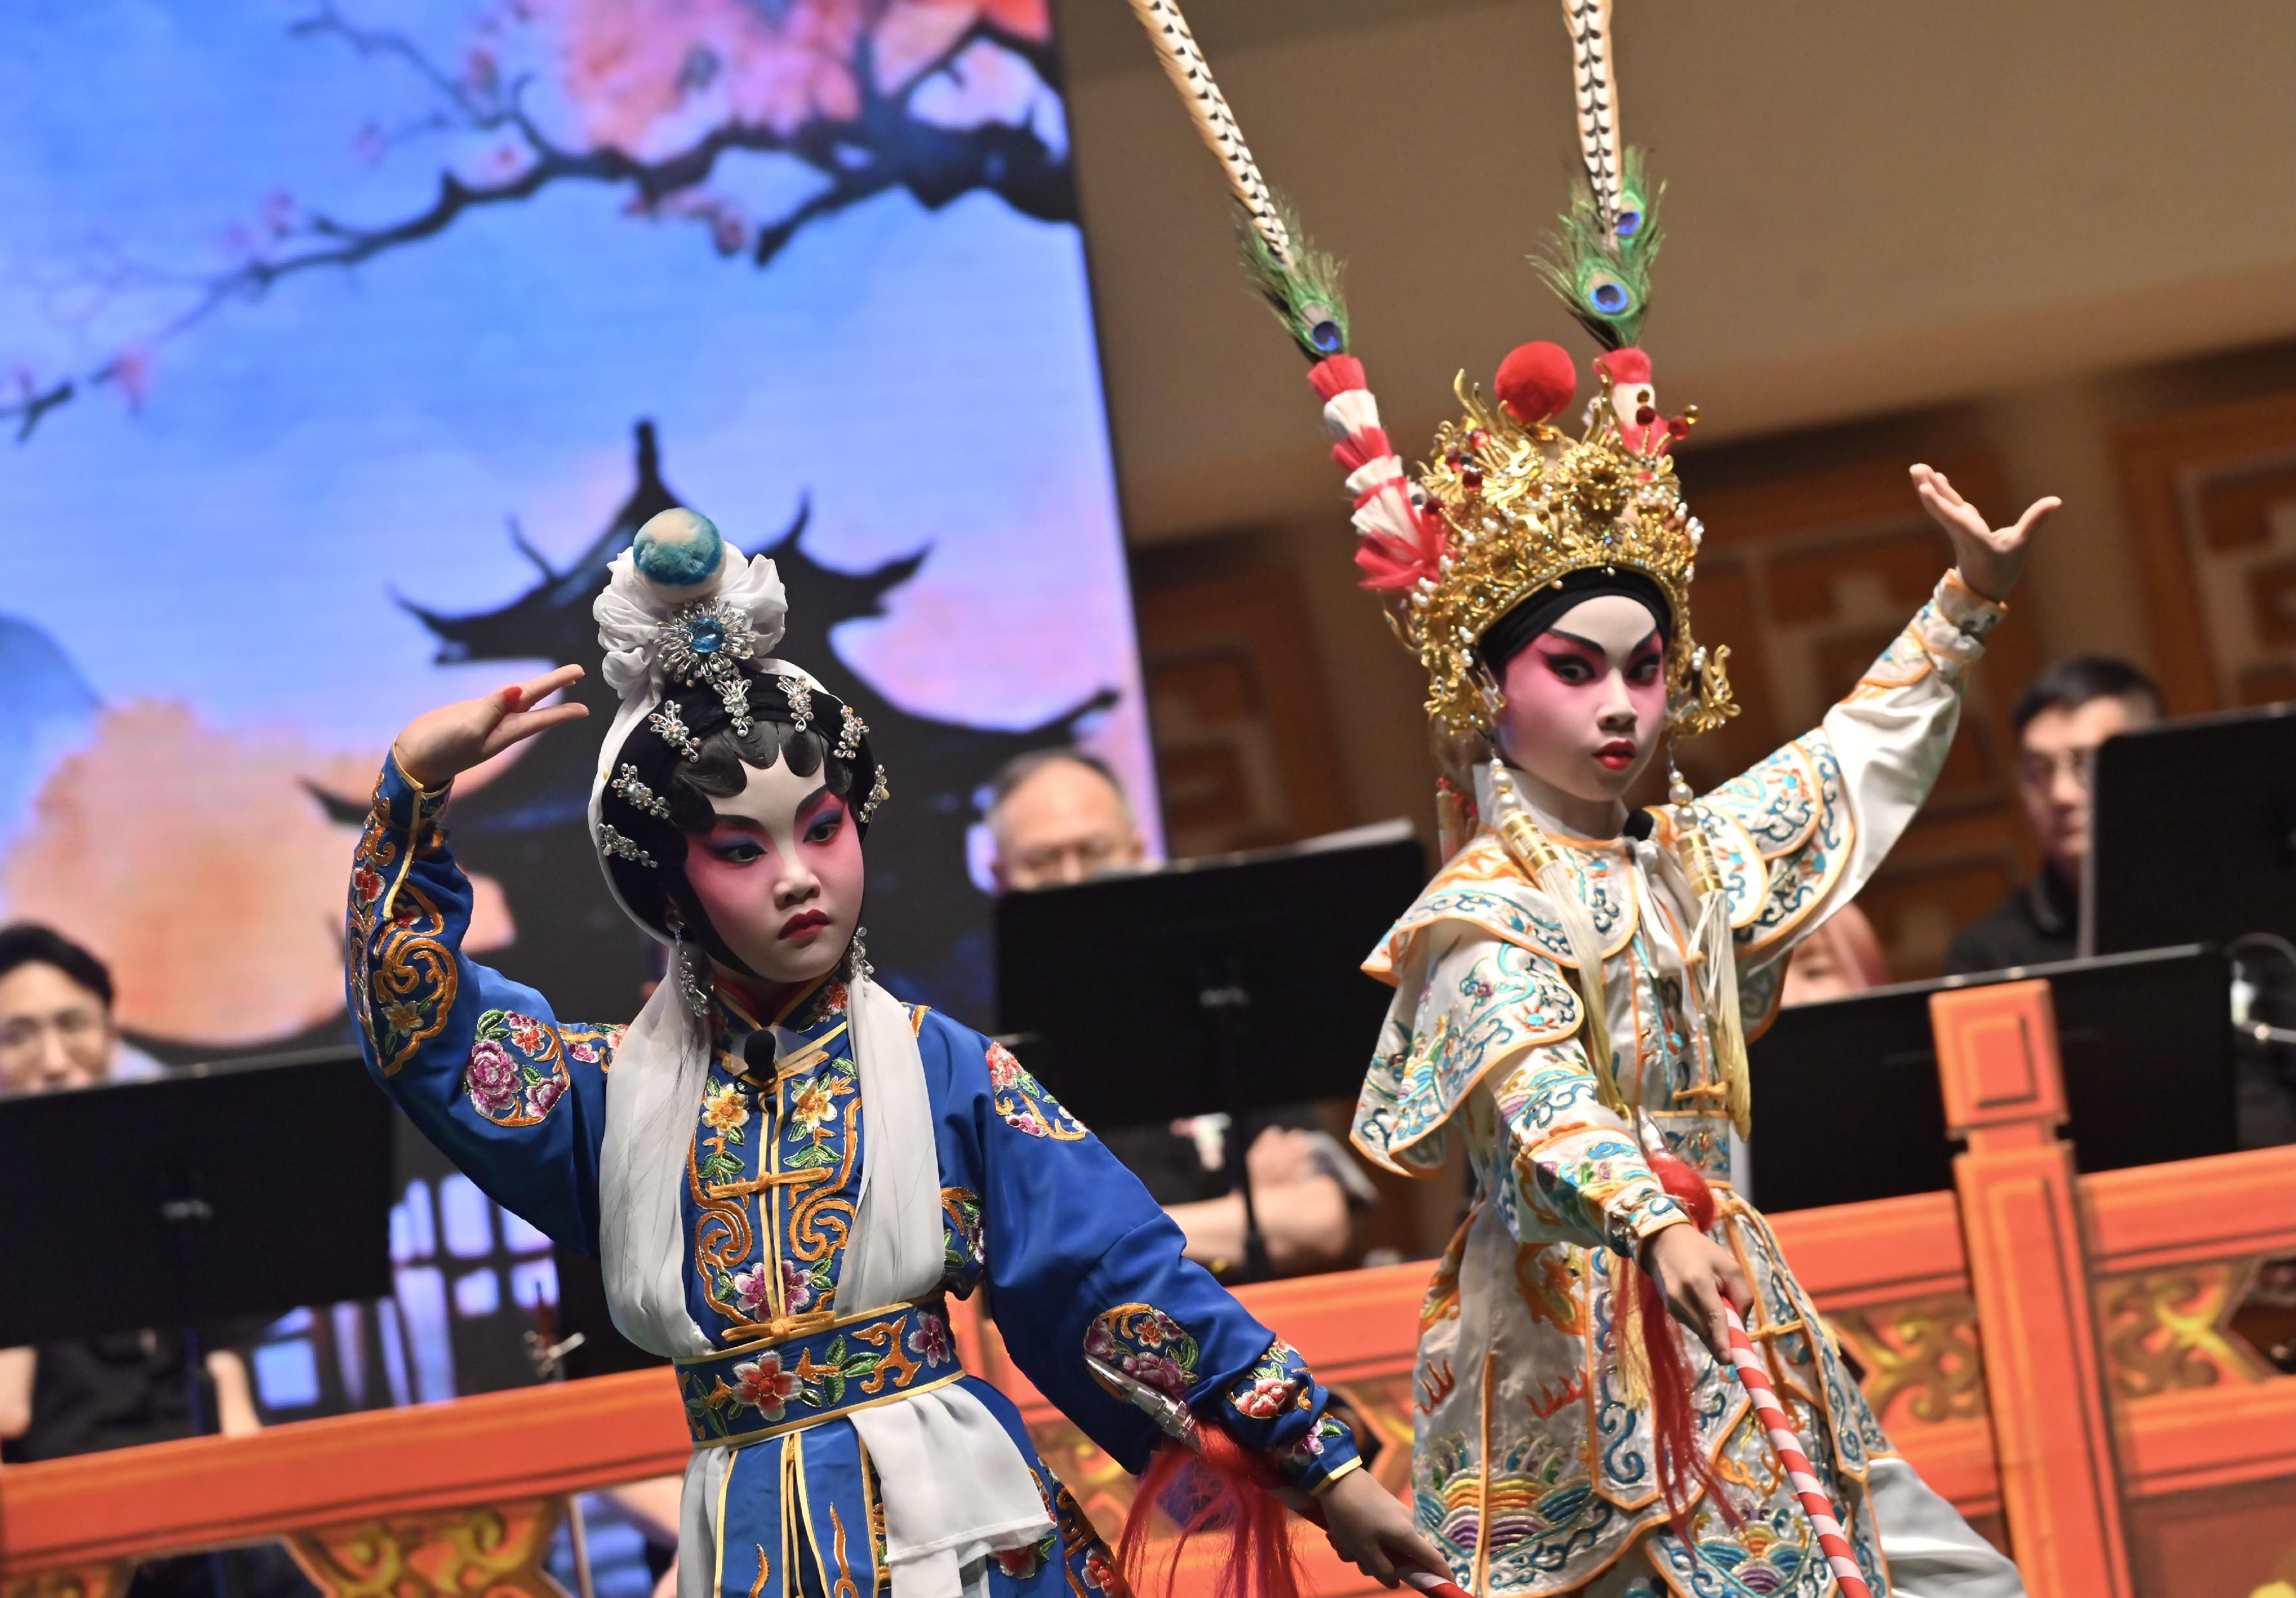 The annual Cantonese Opera Day, presented by the Leisure and Cultural Services Department, was held this afternoon (November 26). Photo shows young Cantonese opera talents performing onstage in the "Cantonese Opera Excerpts" performance.